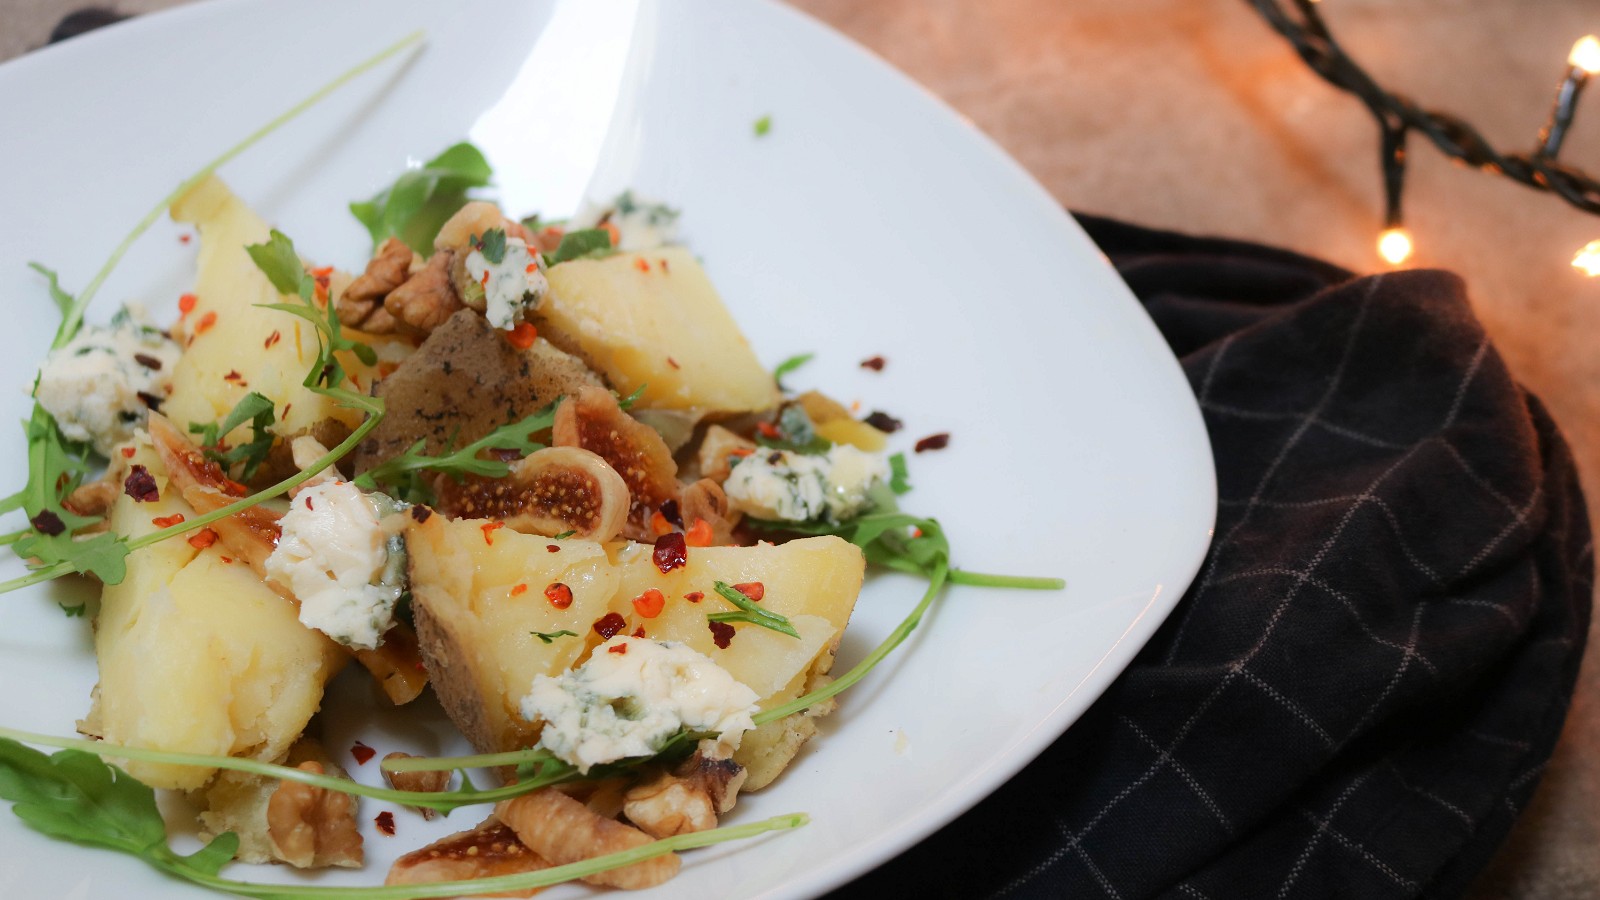 Image of Recipe-87-Festive Potato Salad with Blue Cheese, Figs, Walnuts and Olive Oil